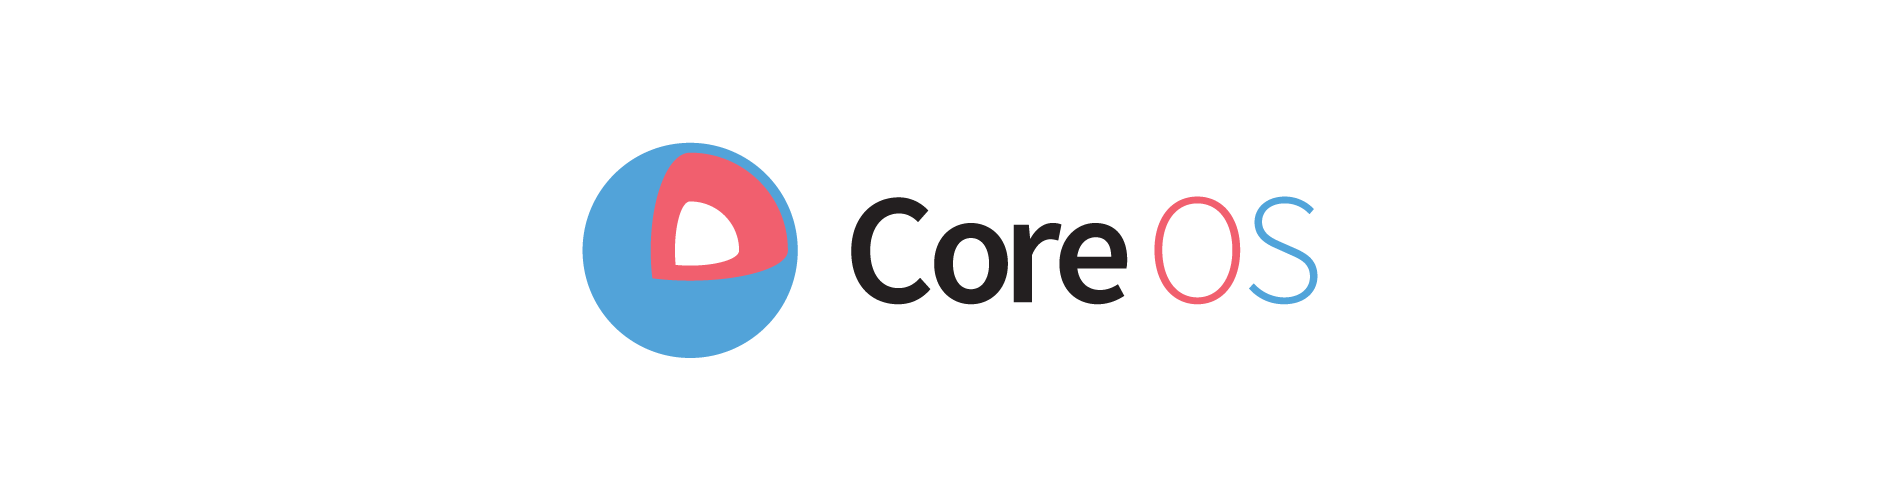 Battle of the Container OSes: CoreOS feature image